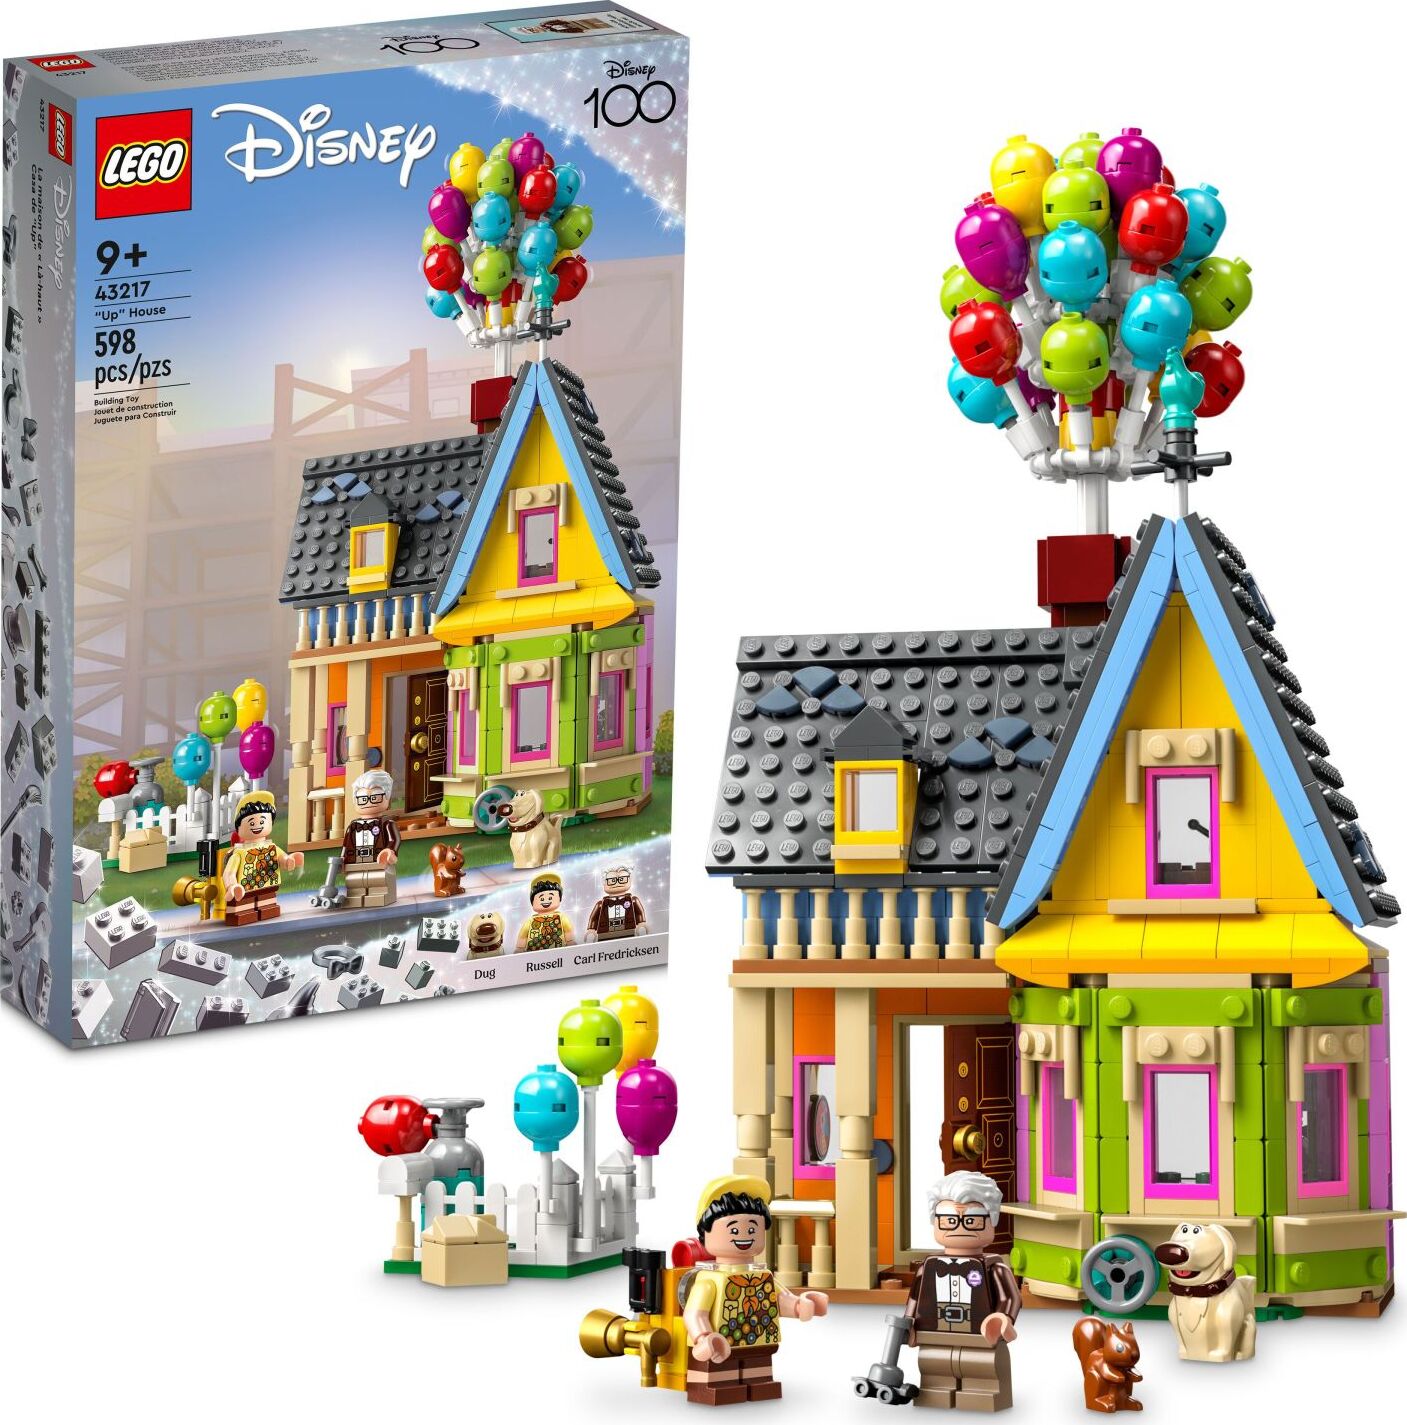 Bring Carl's Home from Disney/Pixar's 'UP' Home with this 3D Wooden Puzzle!